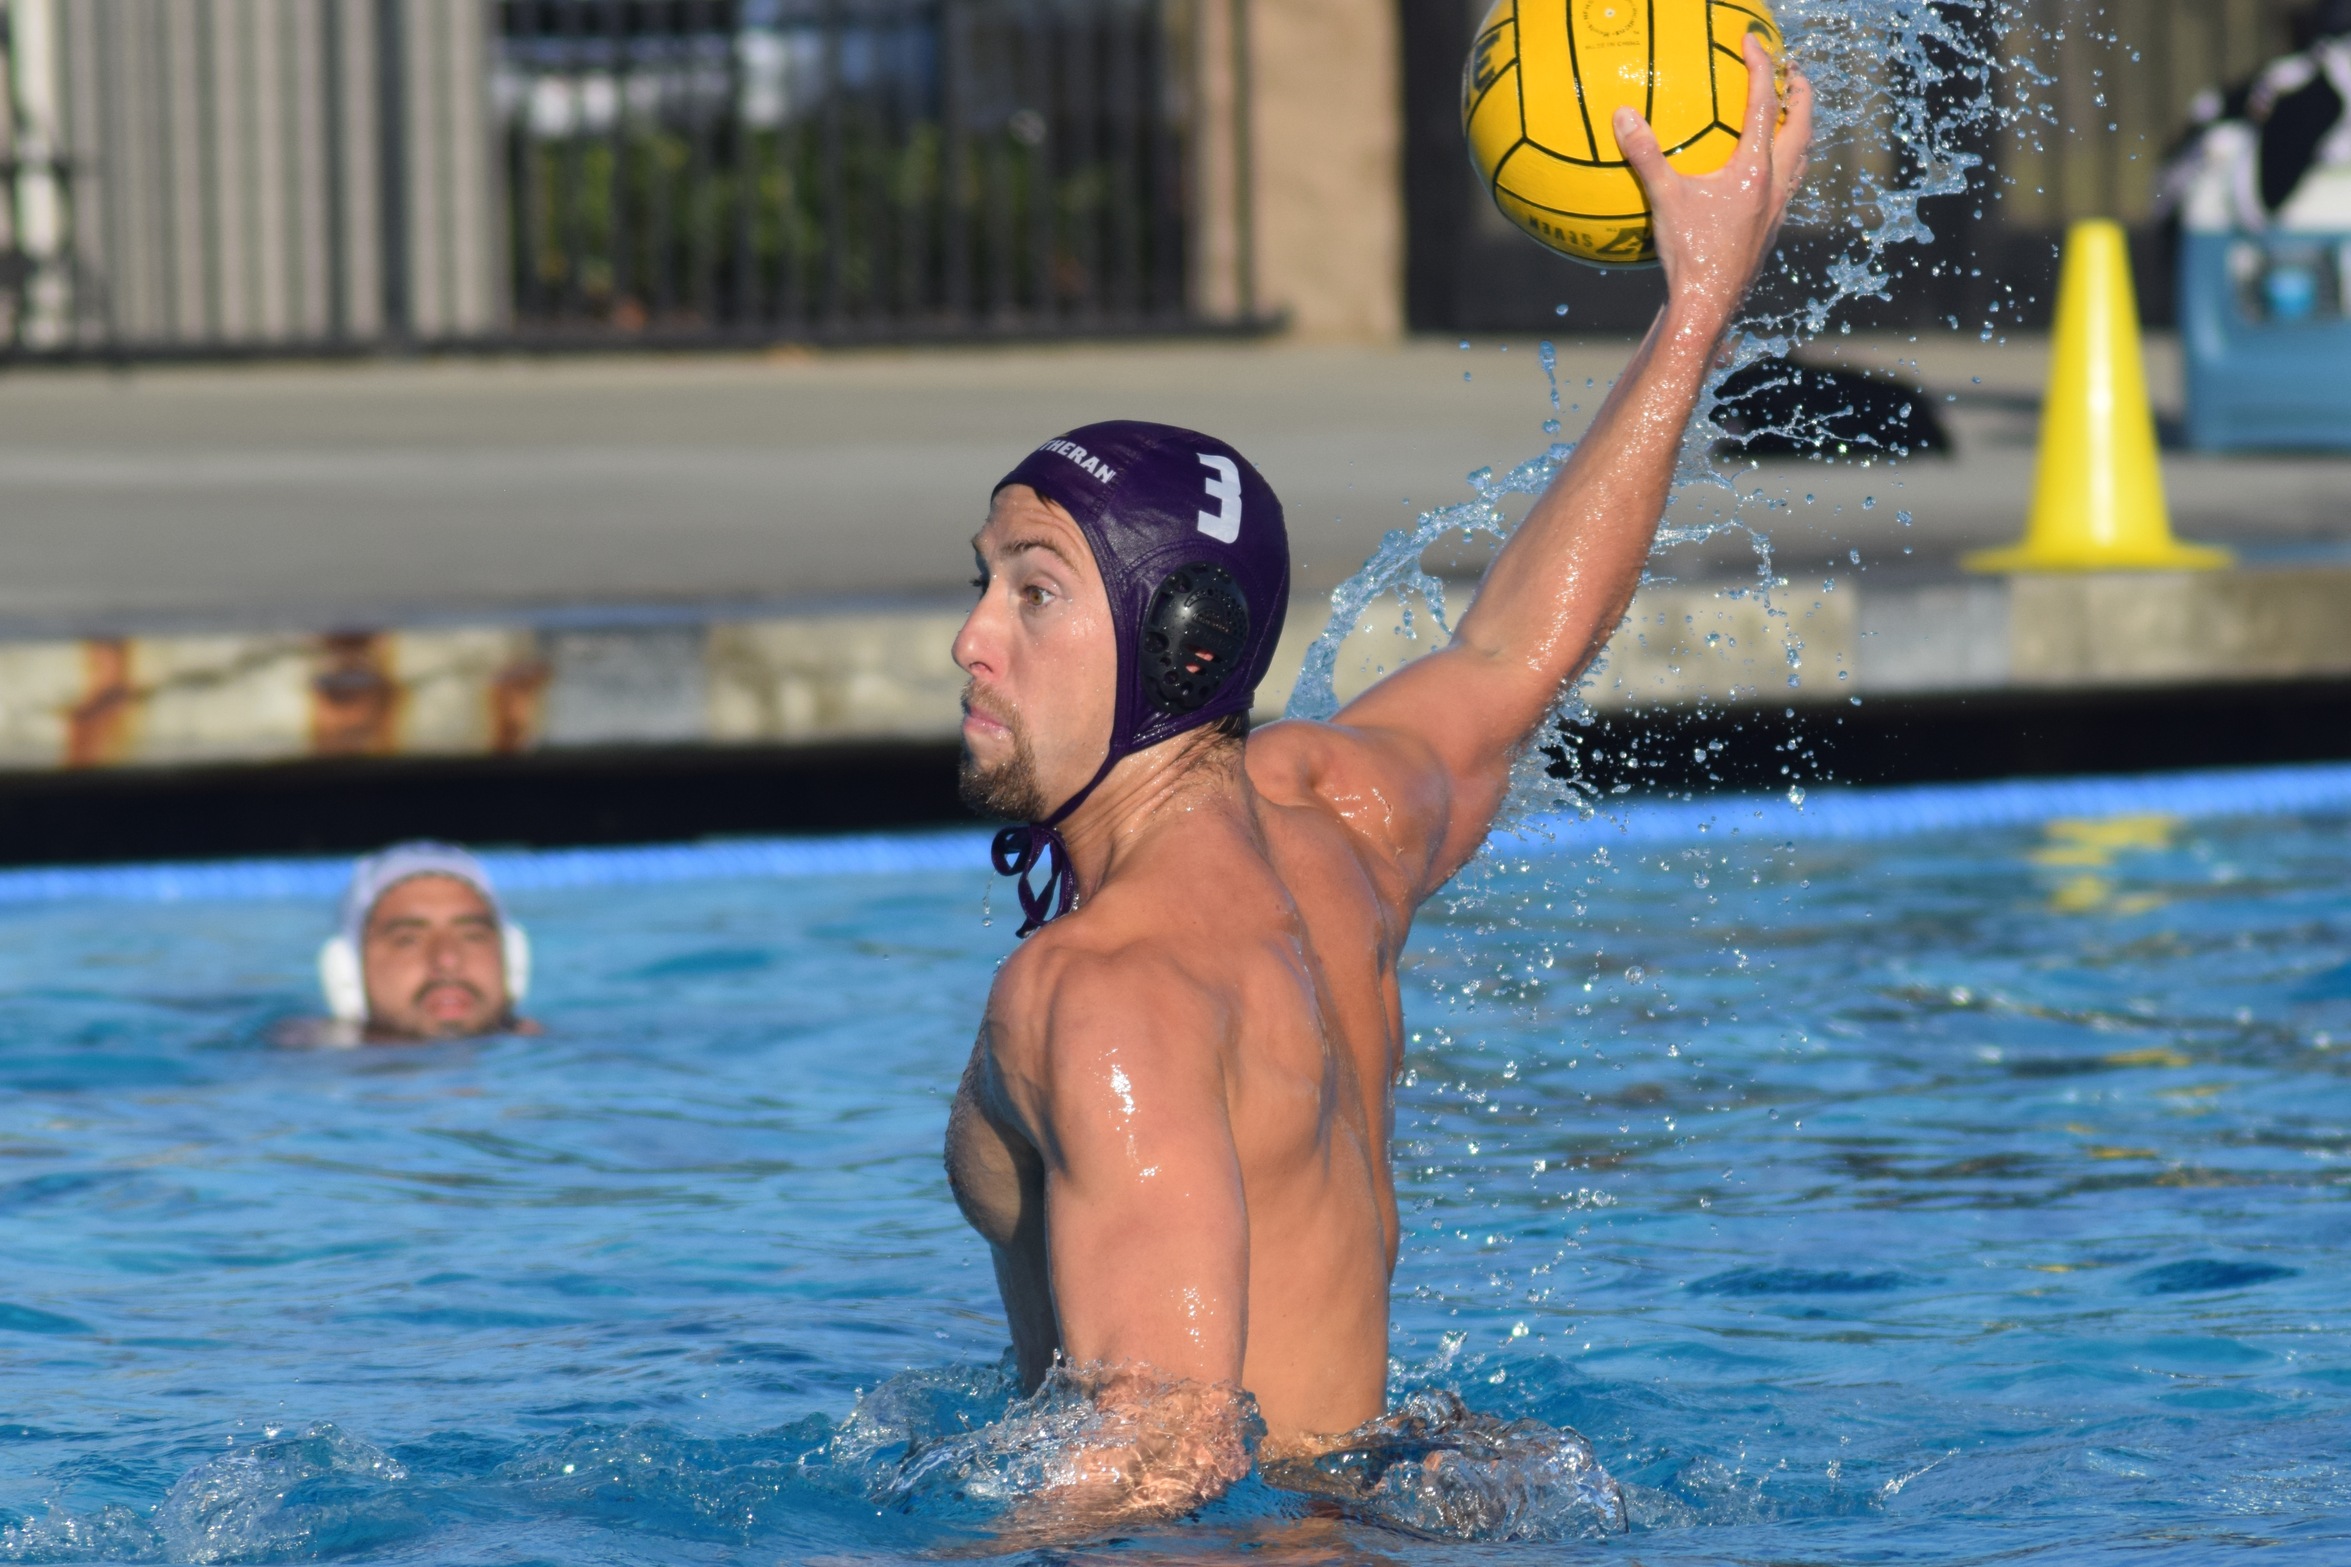 Parker Jory takes and converts a five-meter penalty shot. (Photo: Izzy De Souza)